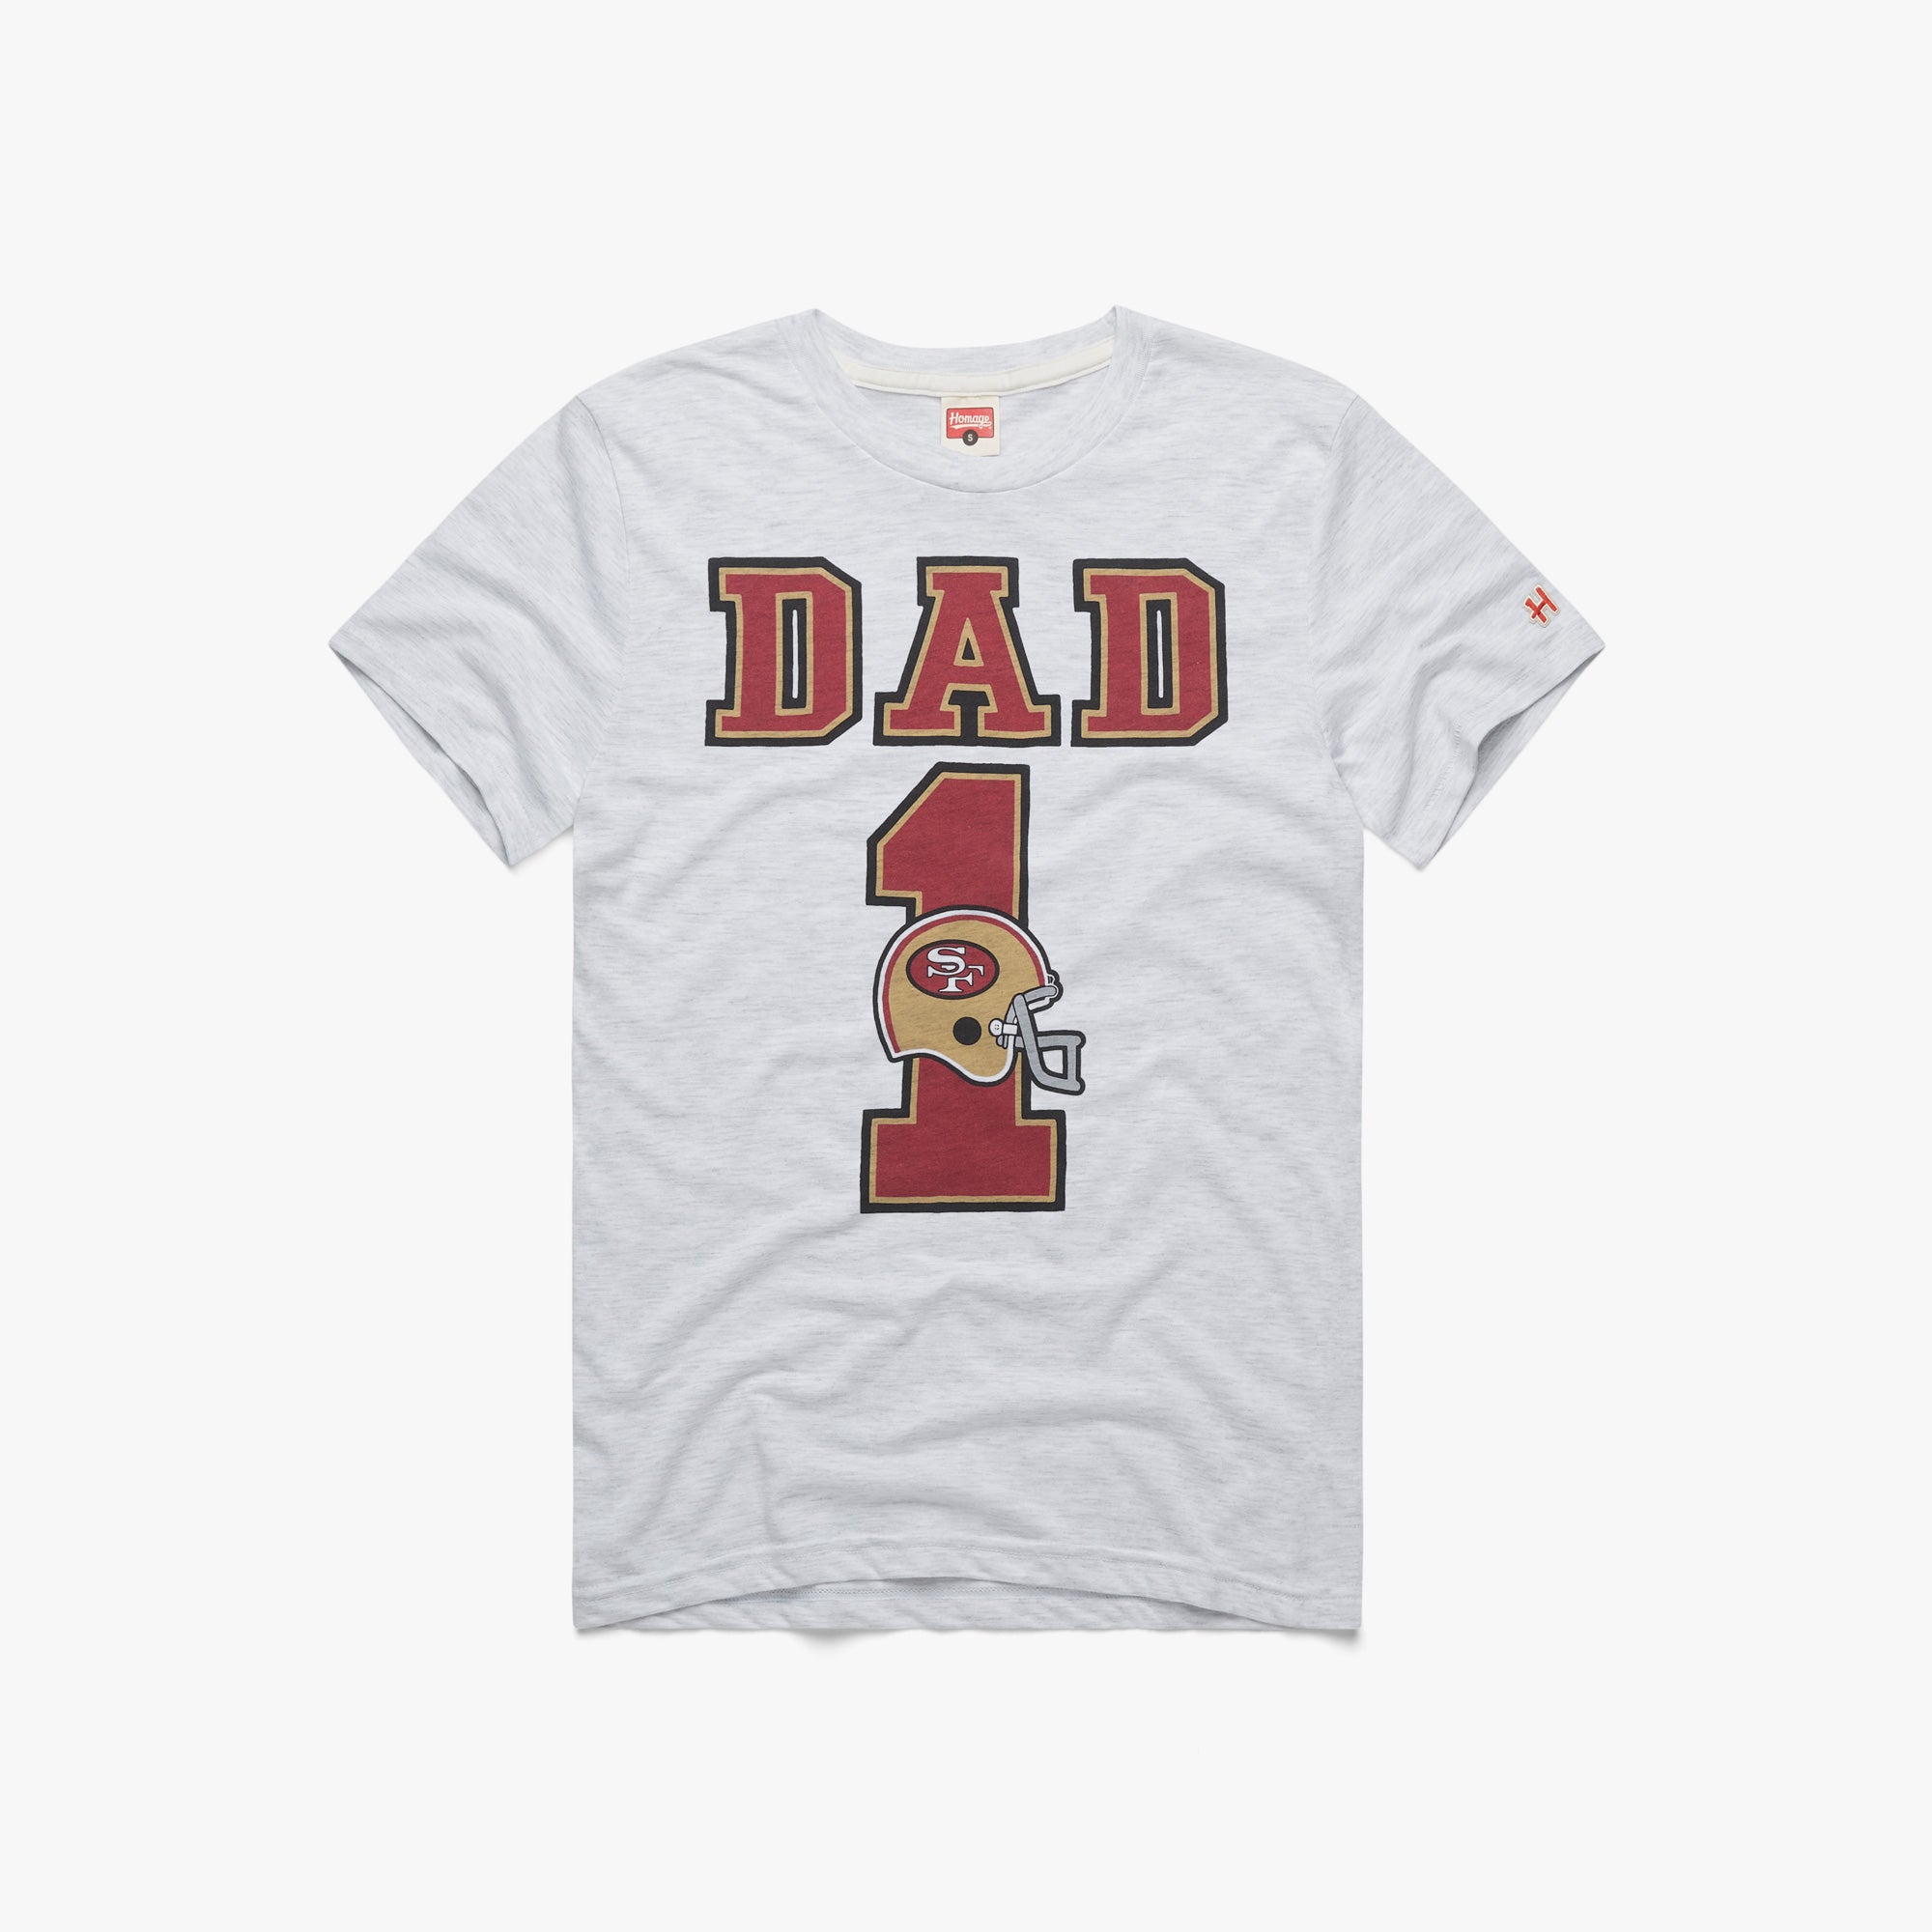 The Only Thing Dad Loves His Daughter San Francisco 49ers T-Shirt